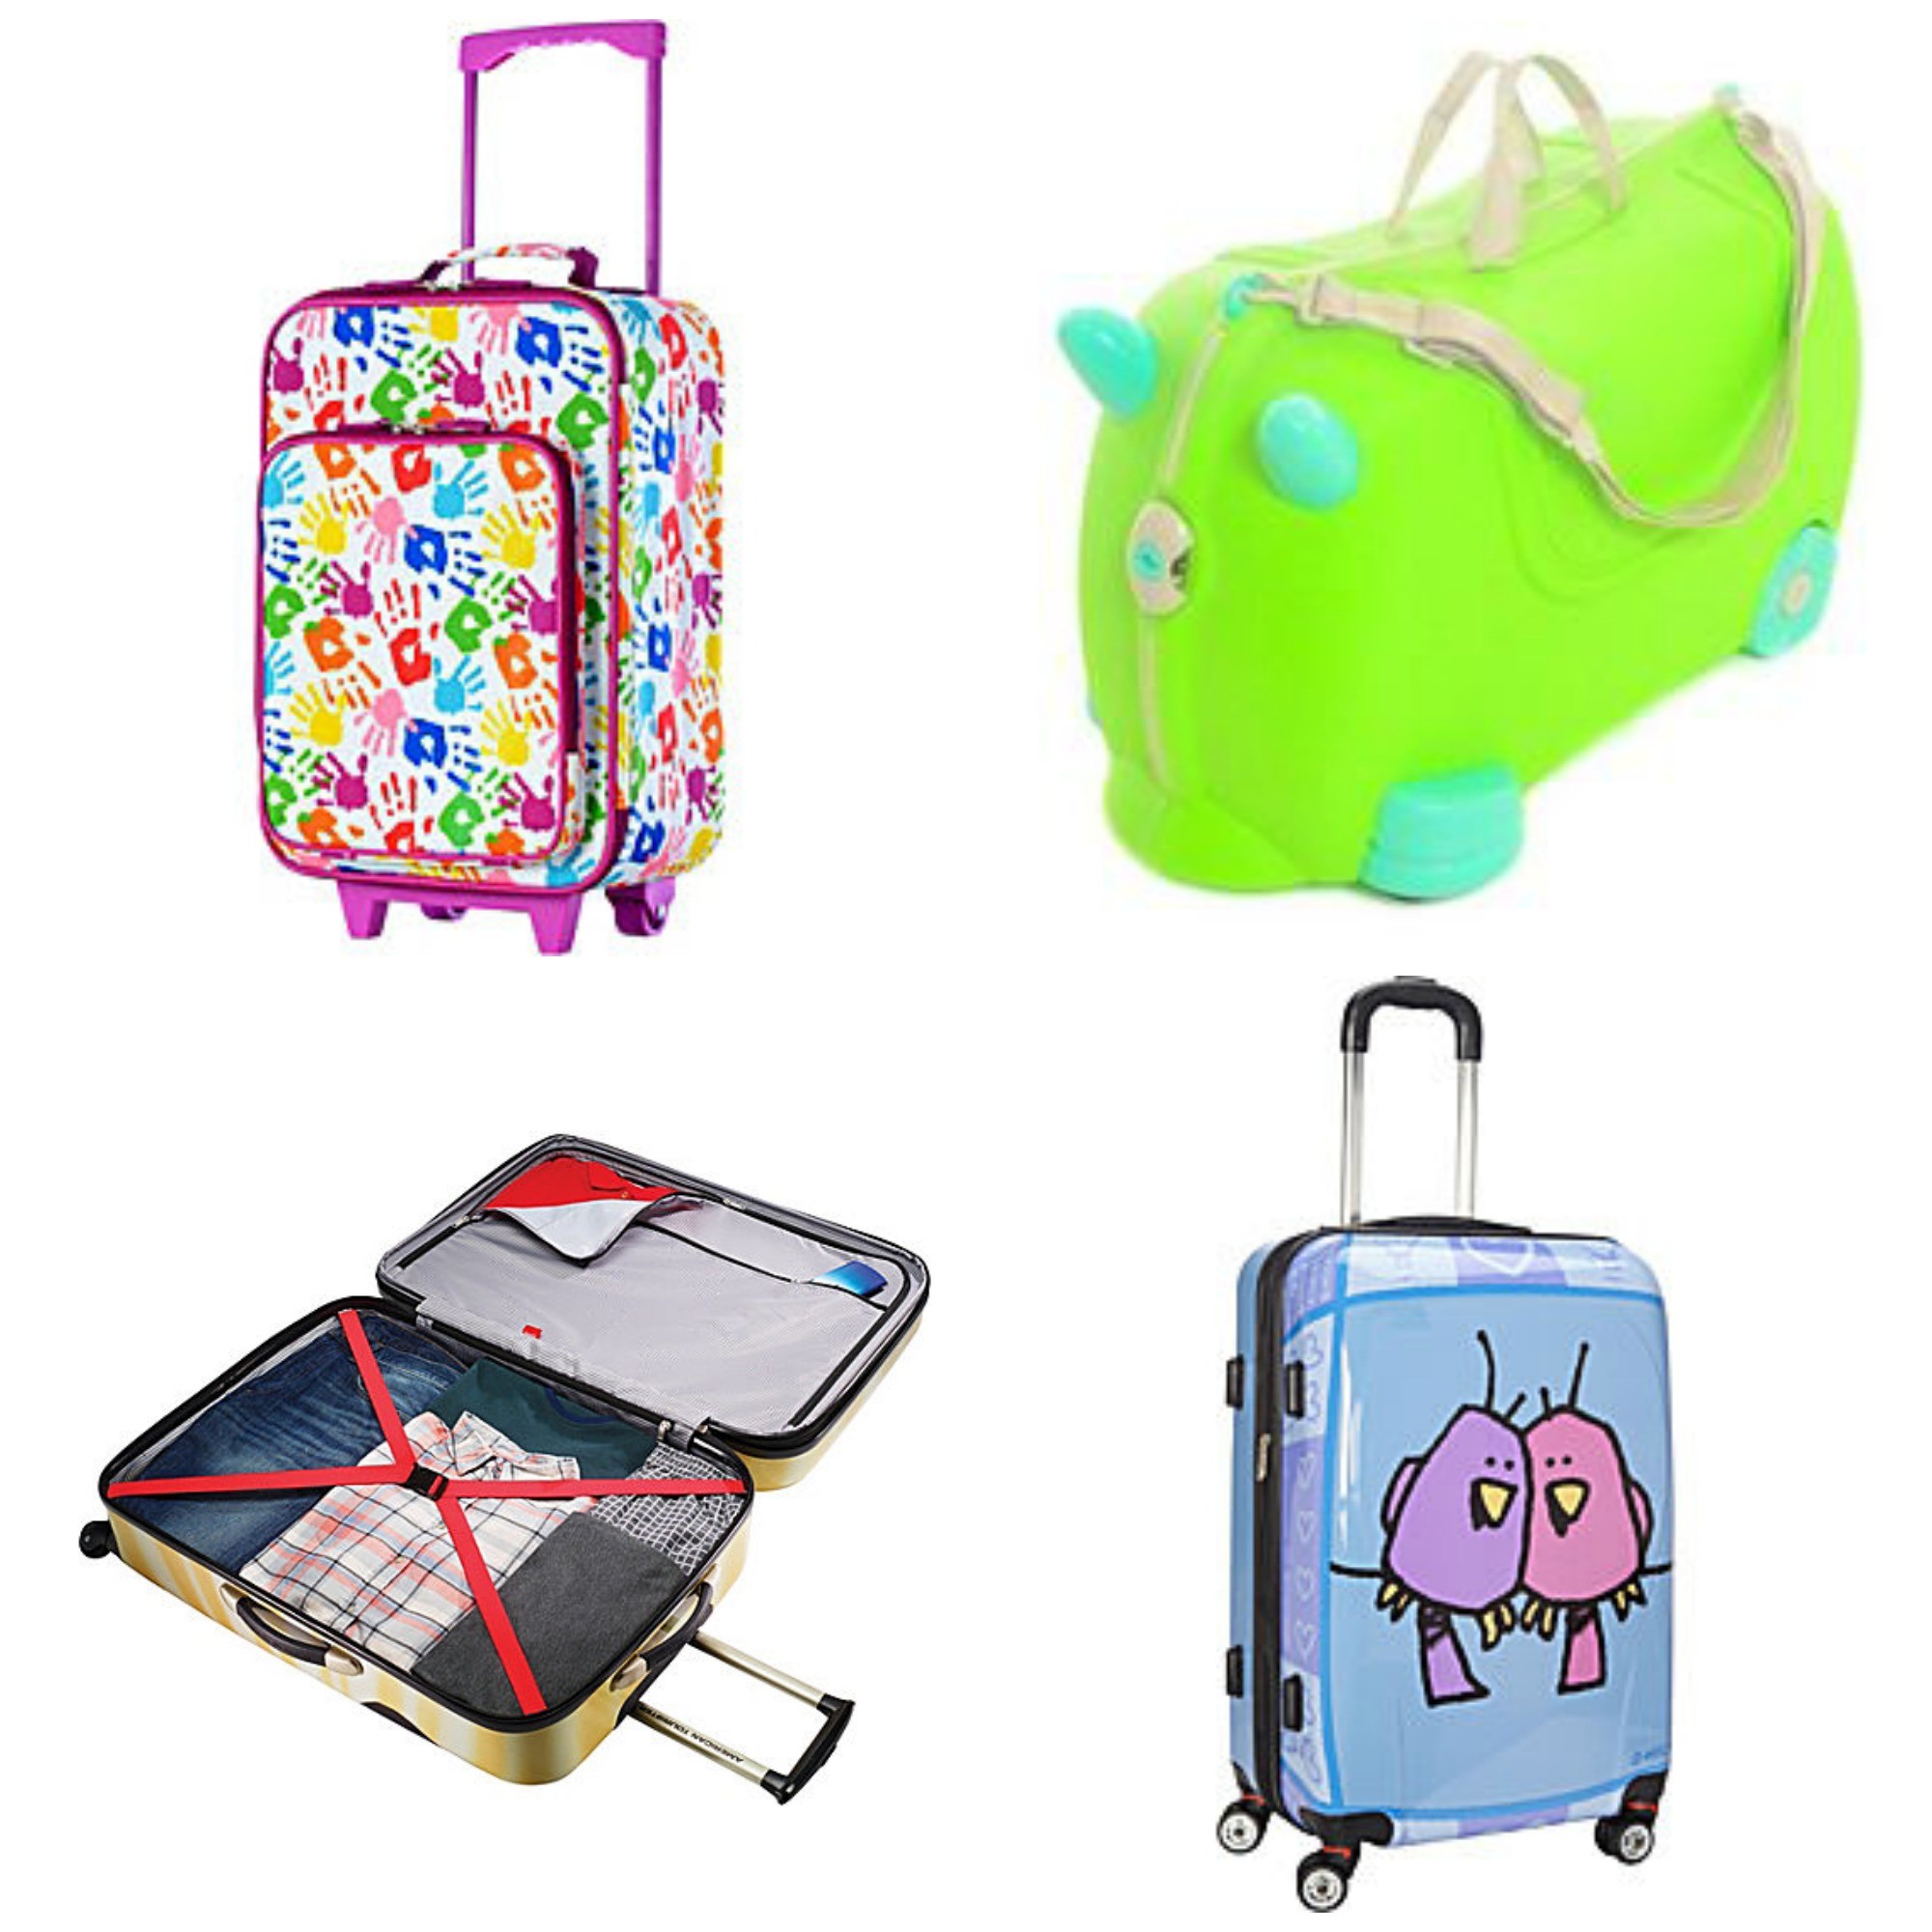 How to Choose Kids Luggage